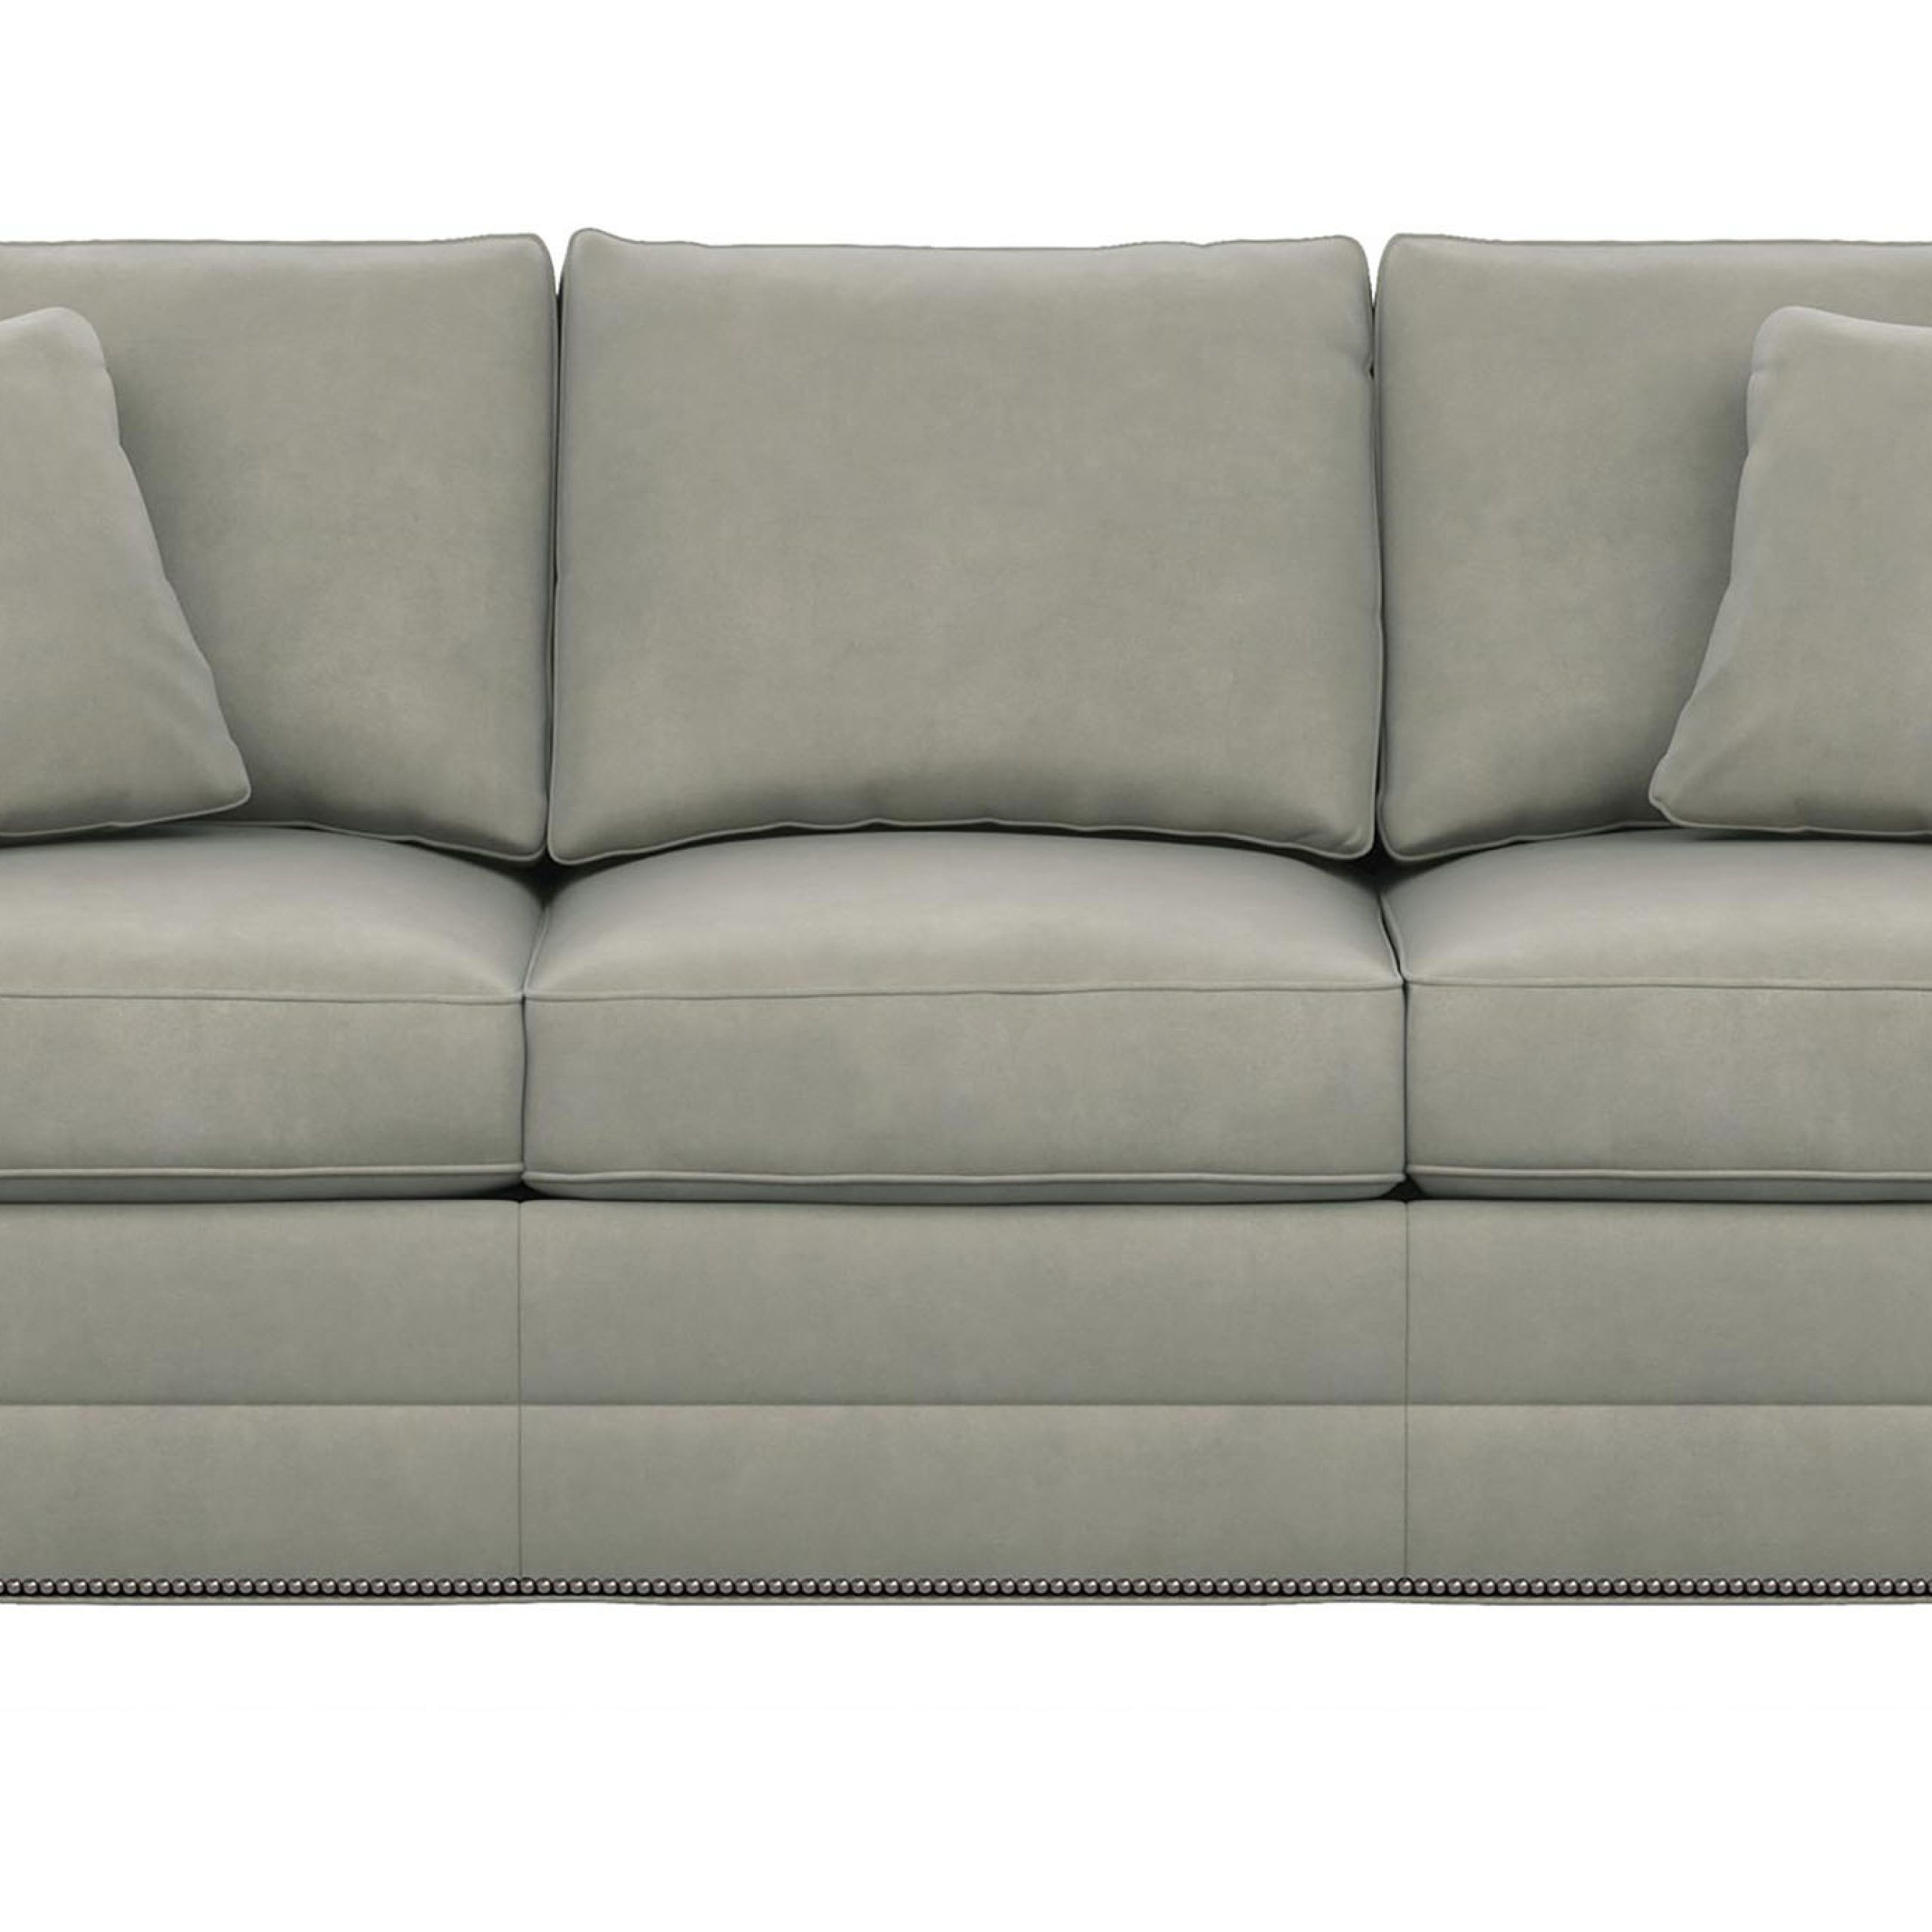 Bennett Roll Arm Three Seat Sofa | Living Room Sofa | Ethan Allen Intended For Traditional 3 Seater Sofas (View 16 of 20)